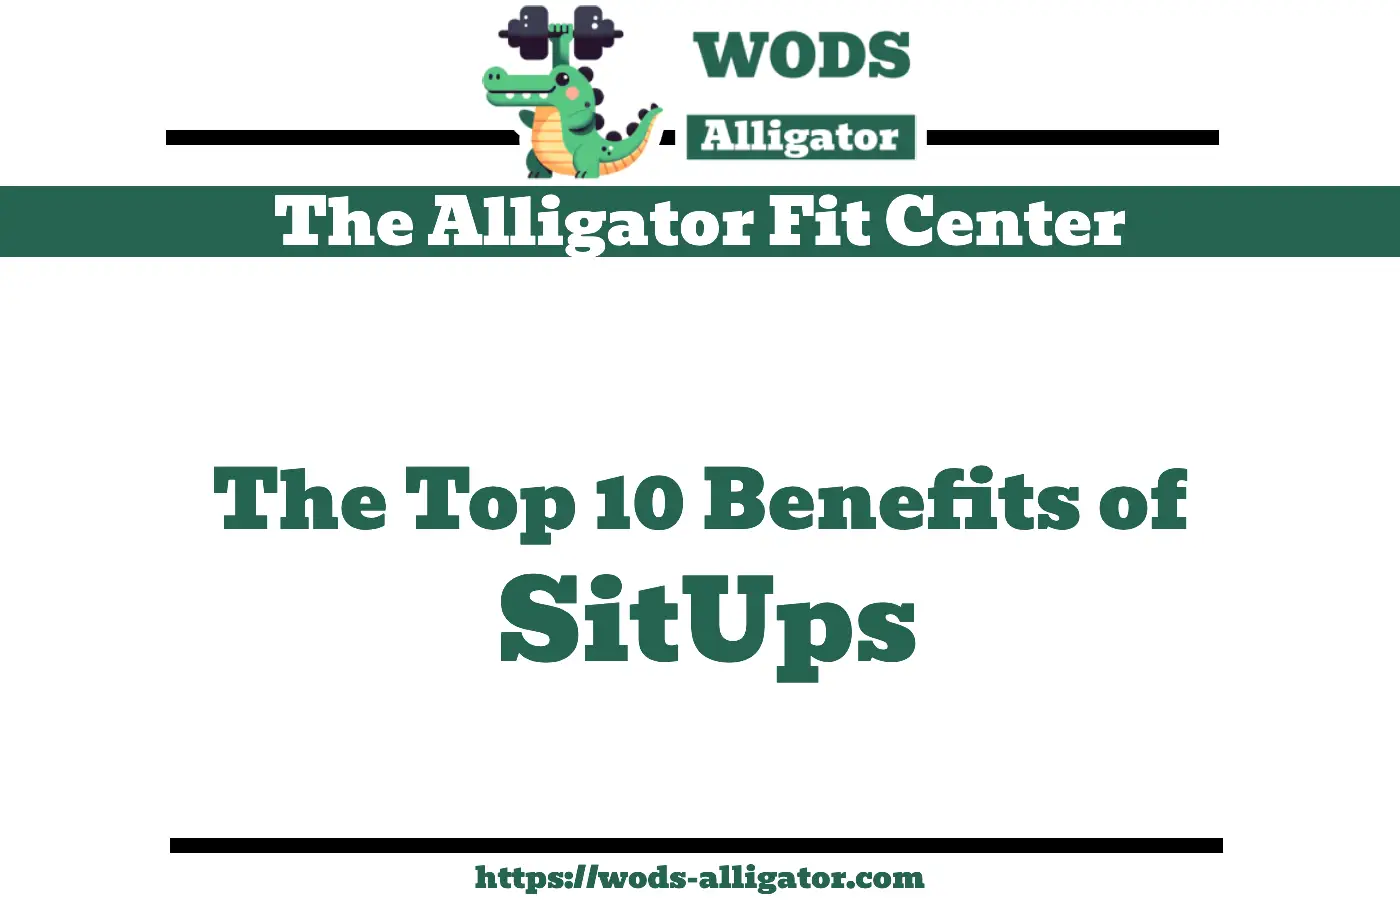 The Top 10 Benefits of SitUps